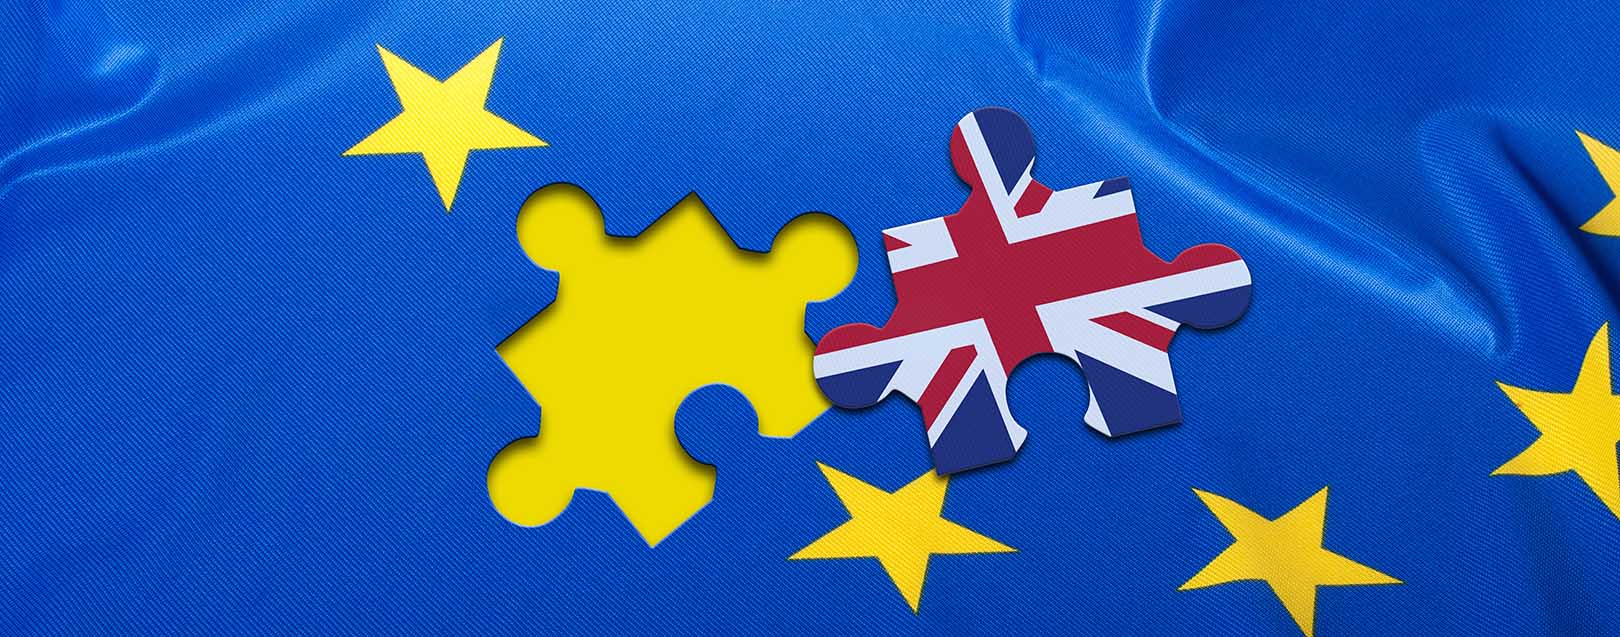 Major Indian firms may be hit due to Brexit: CLSA